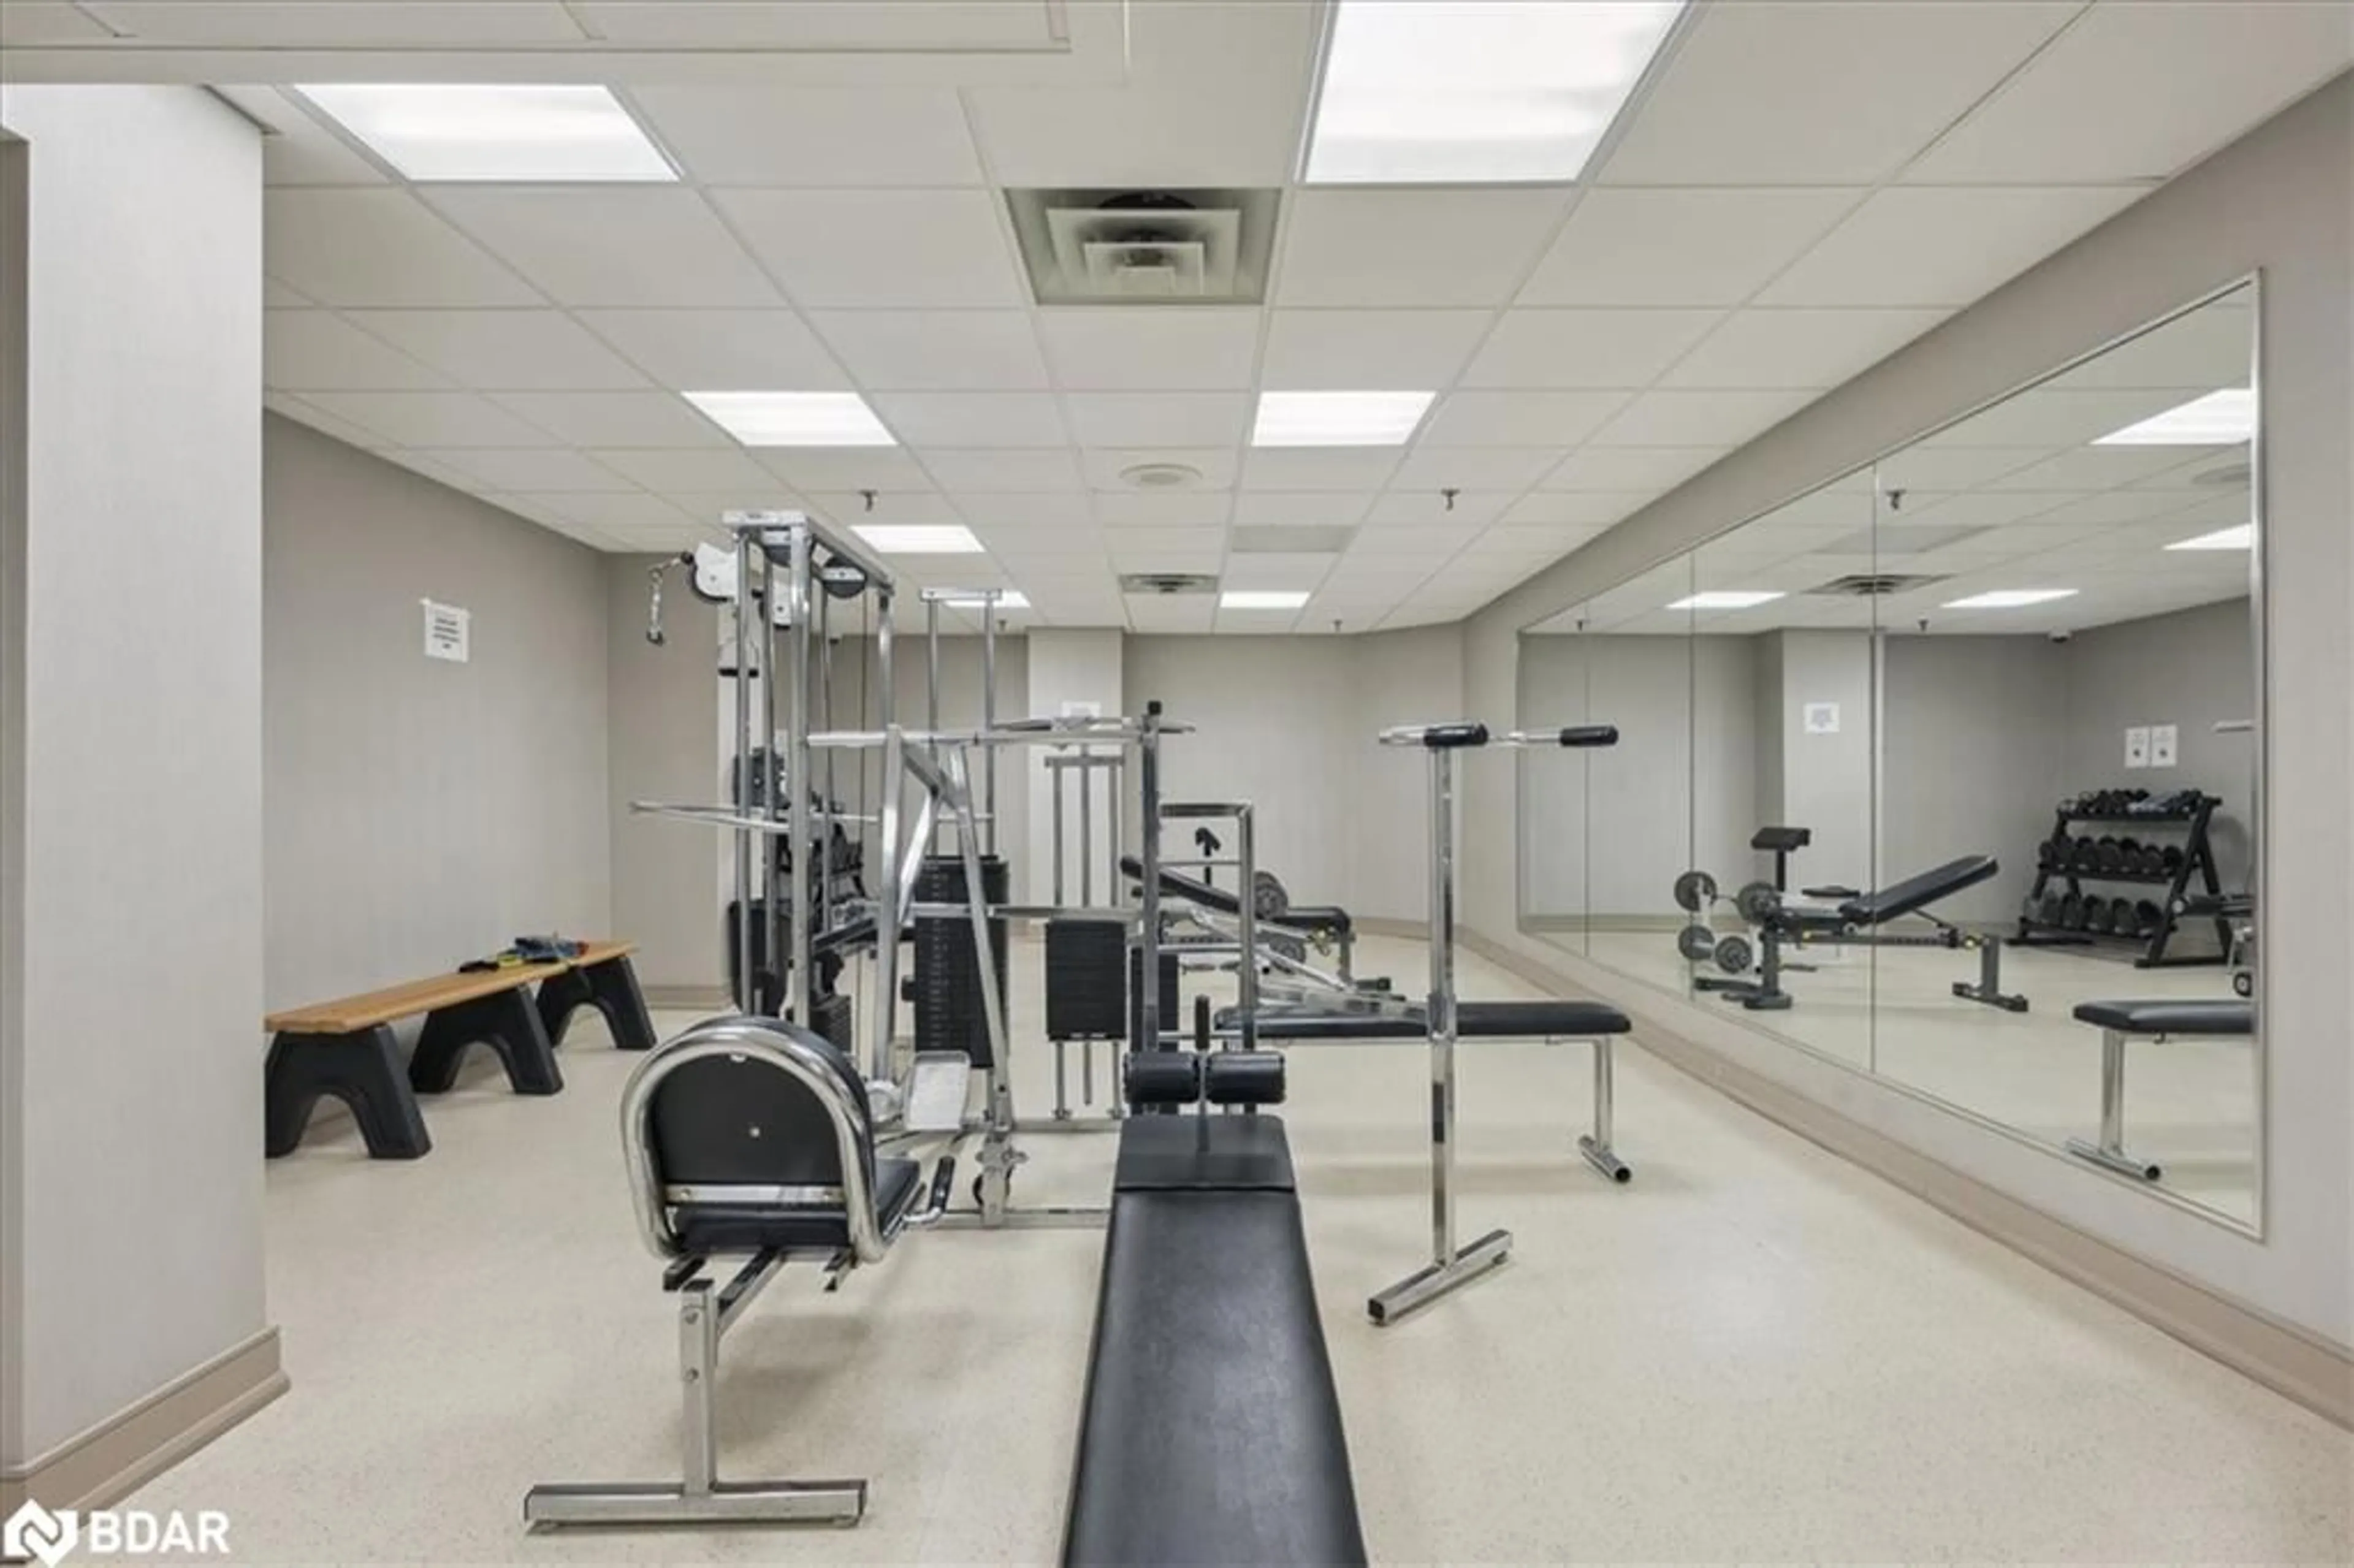 Gym or fitness room for 310 Mill St #807, Brampton Ontario L6Y 3B1